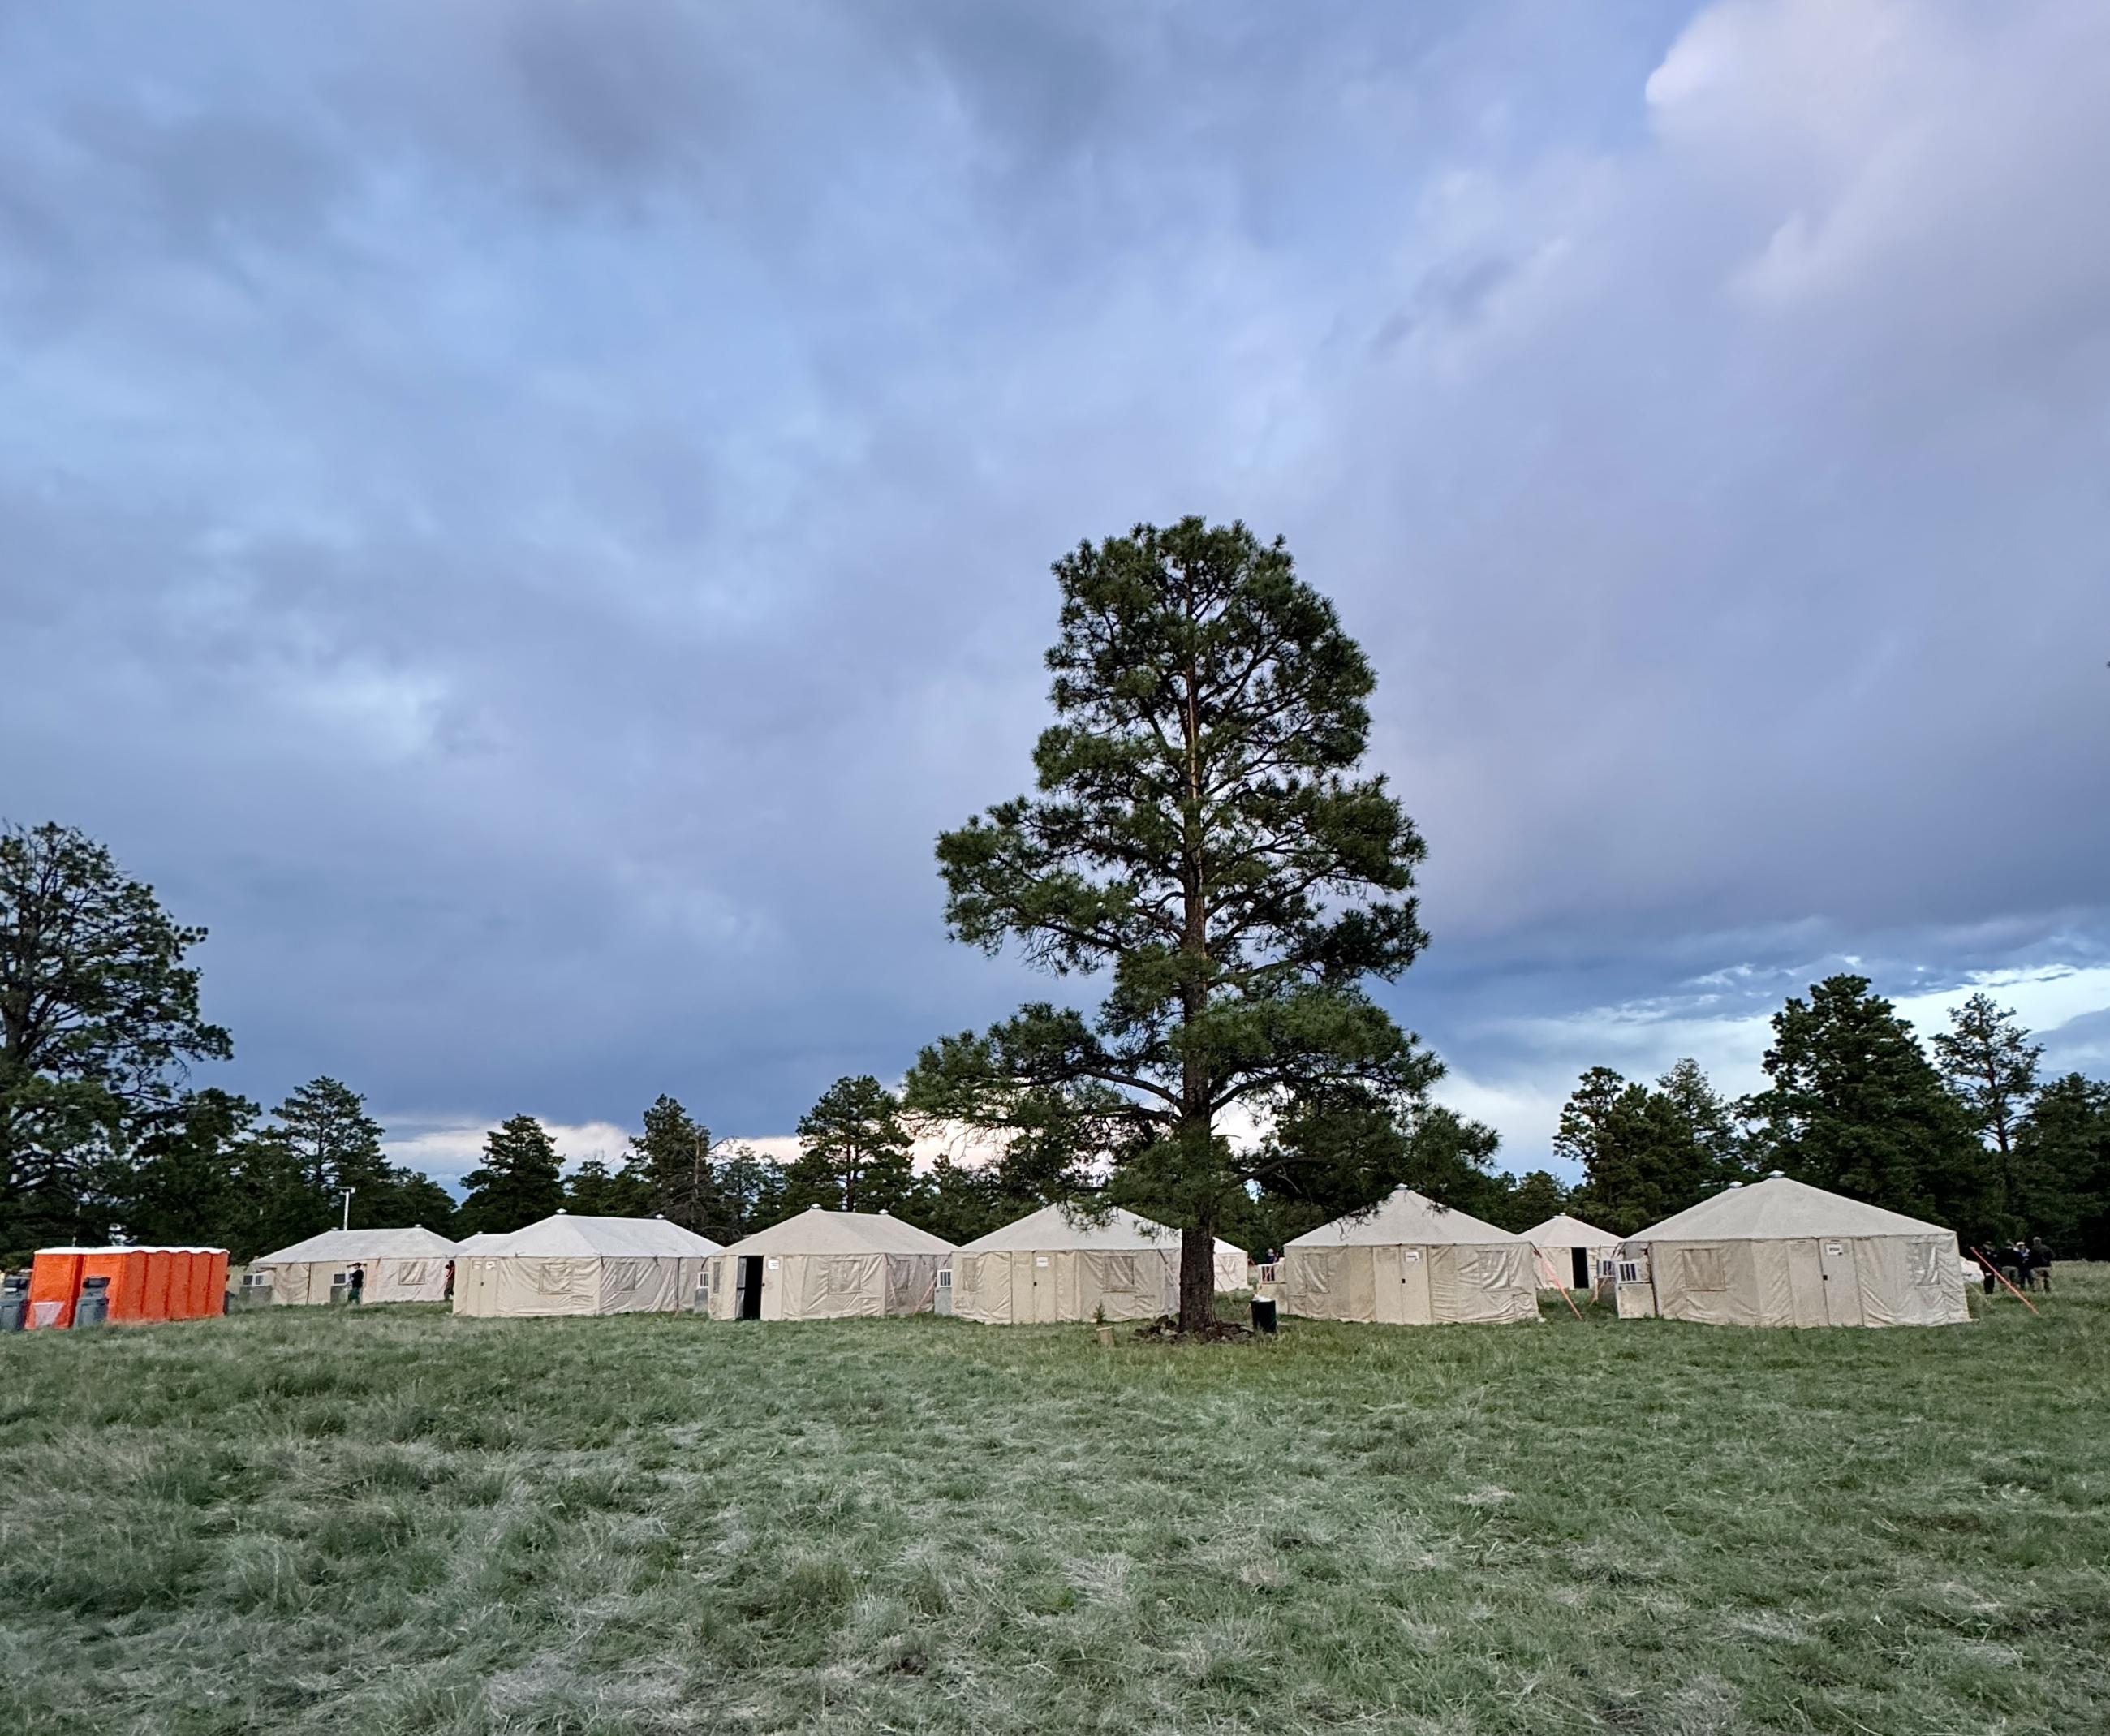 Picture of Ridge Fire Incident Command Post with tan colored yurts in a meadow surrounded by pine trees.